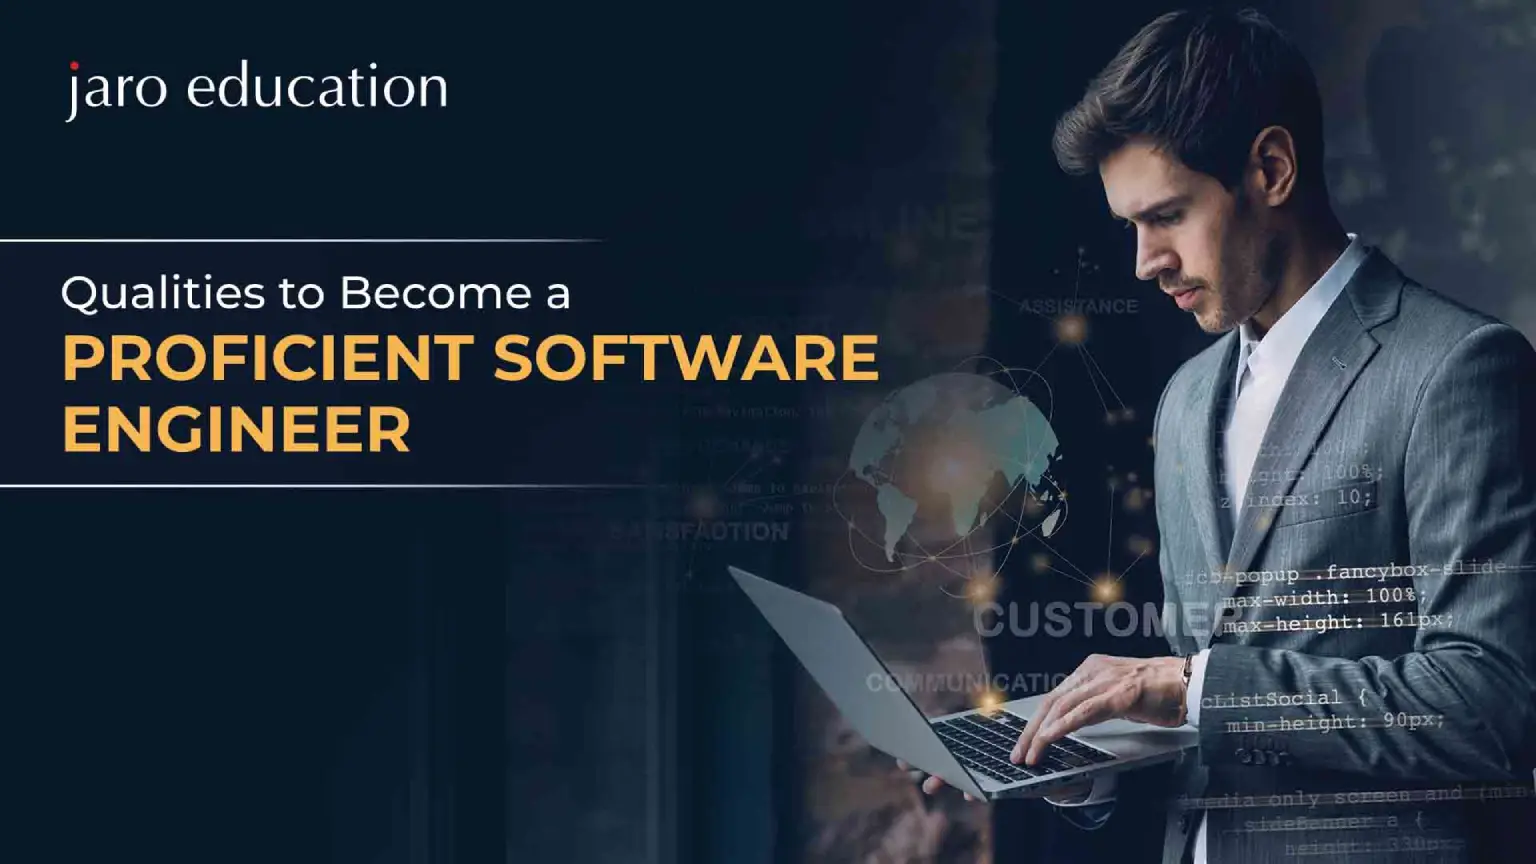 Qualities to Become-a Proficient Software Engineer